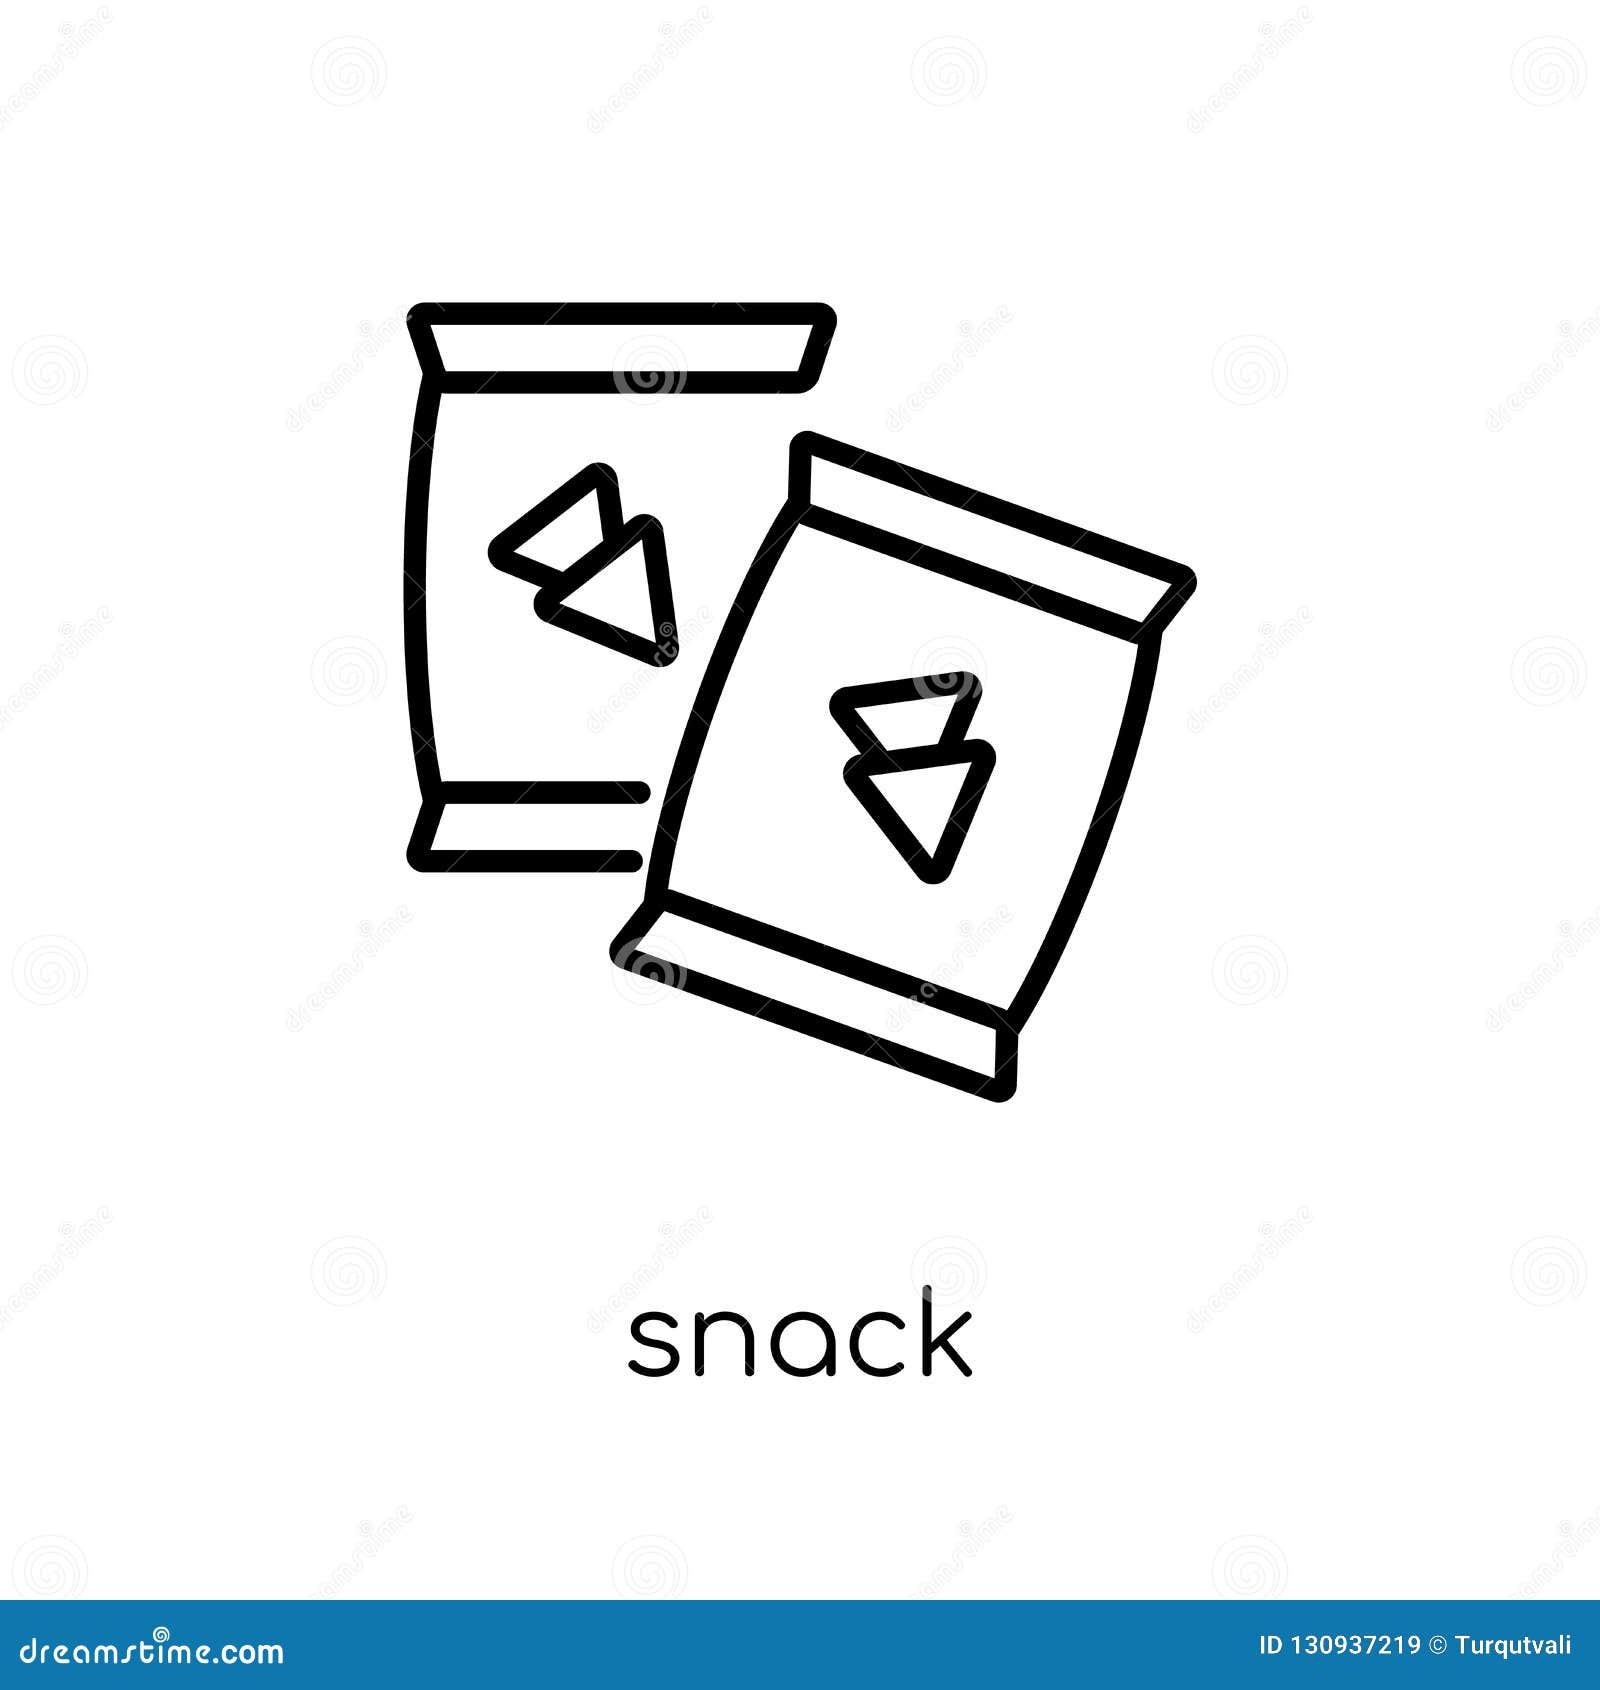 snack icon from birthday and party collection.